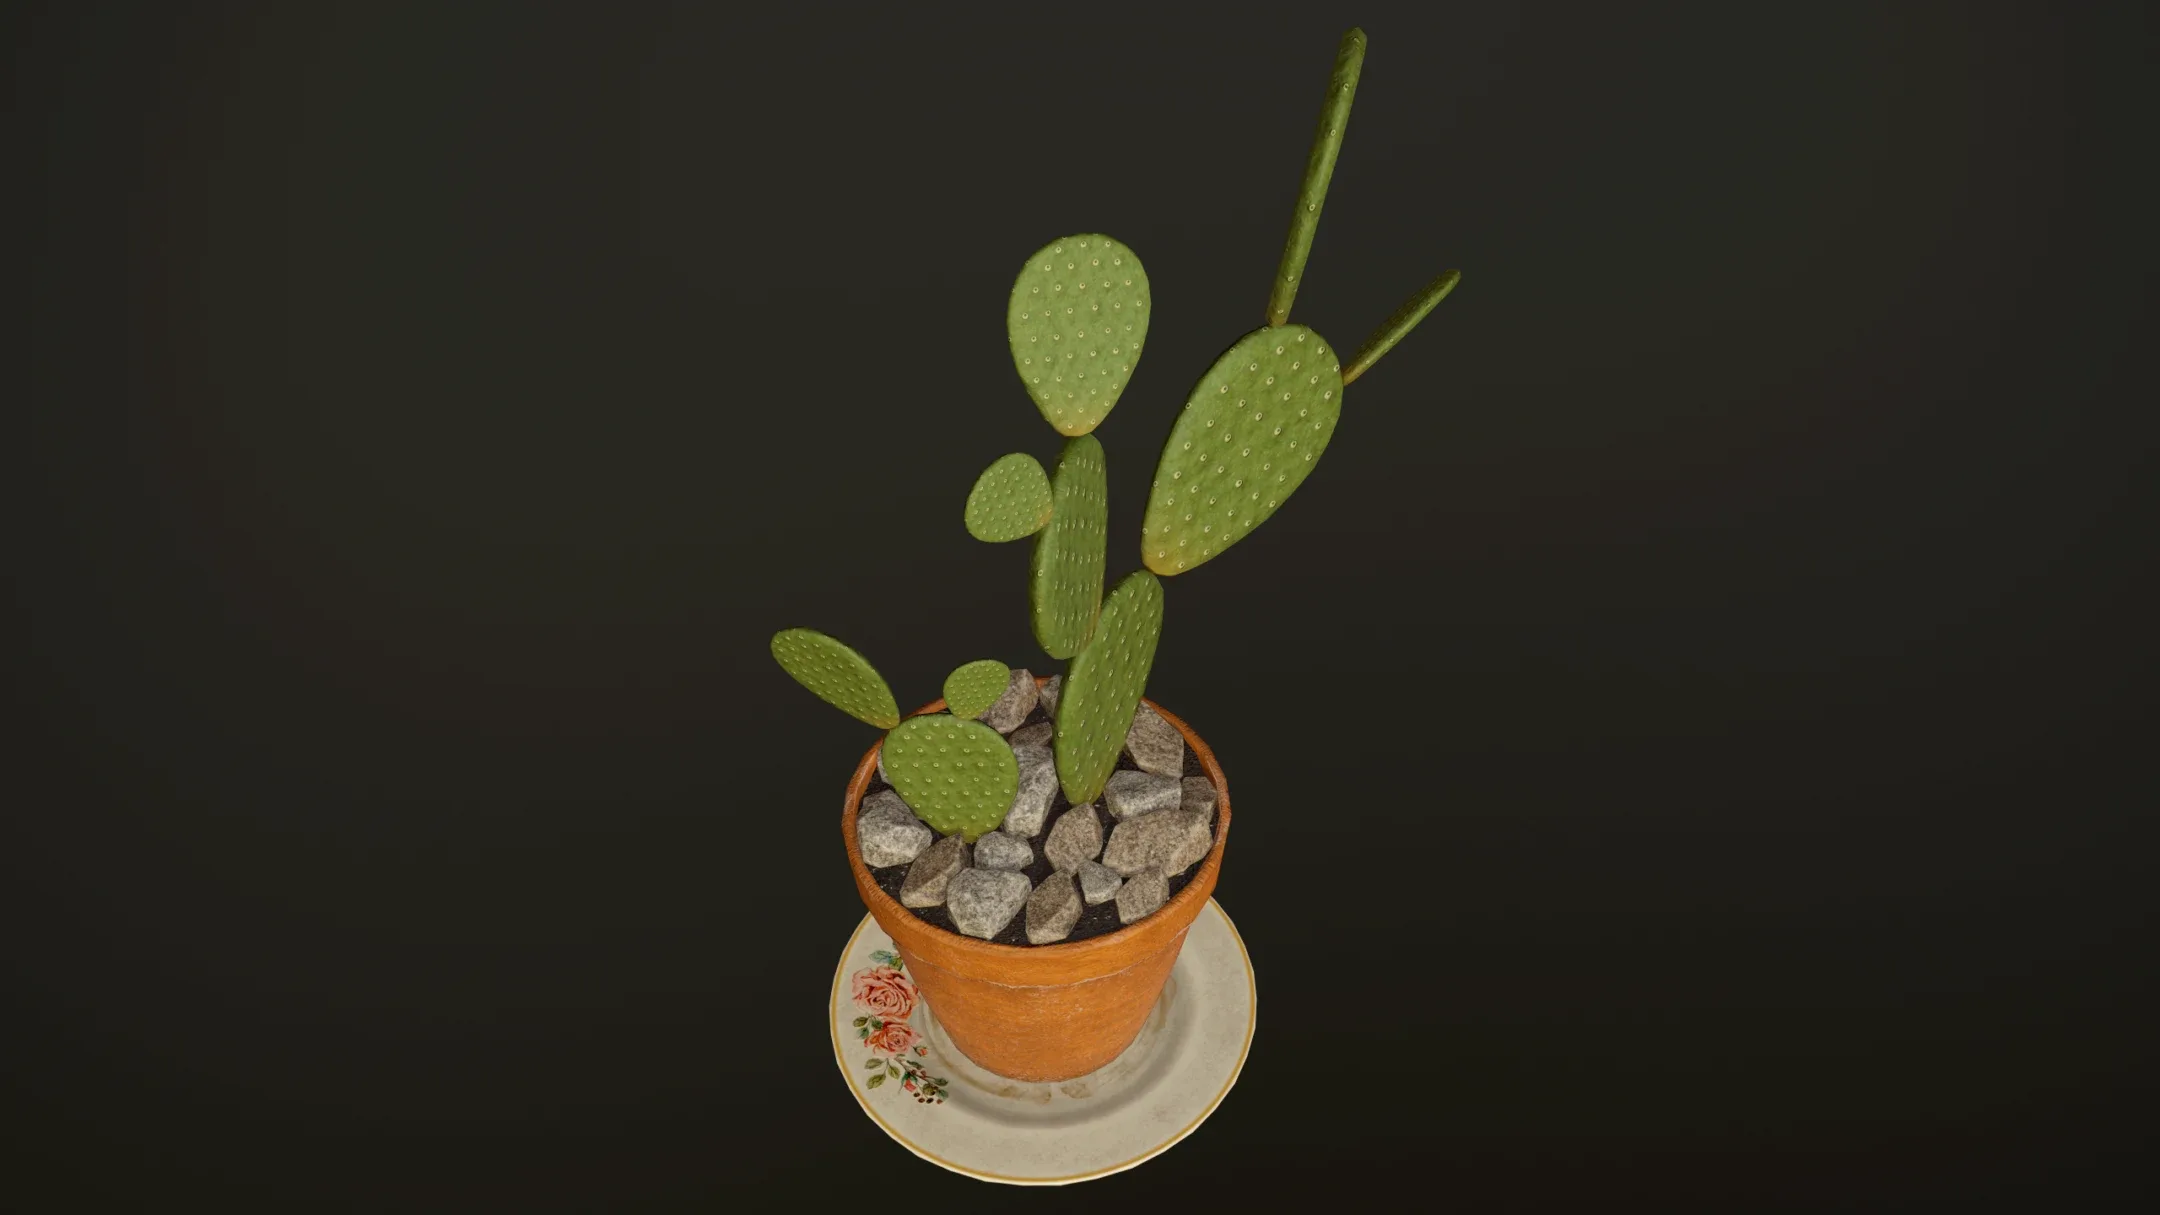 Cactus - PBR Game Ready